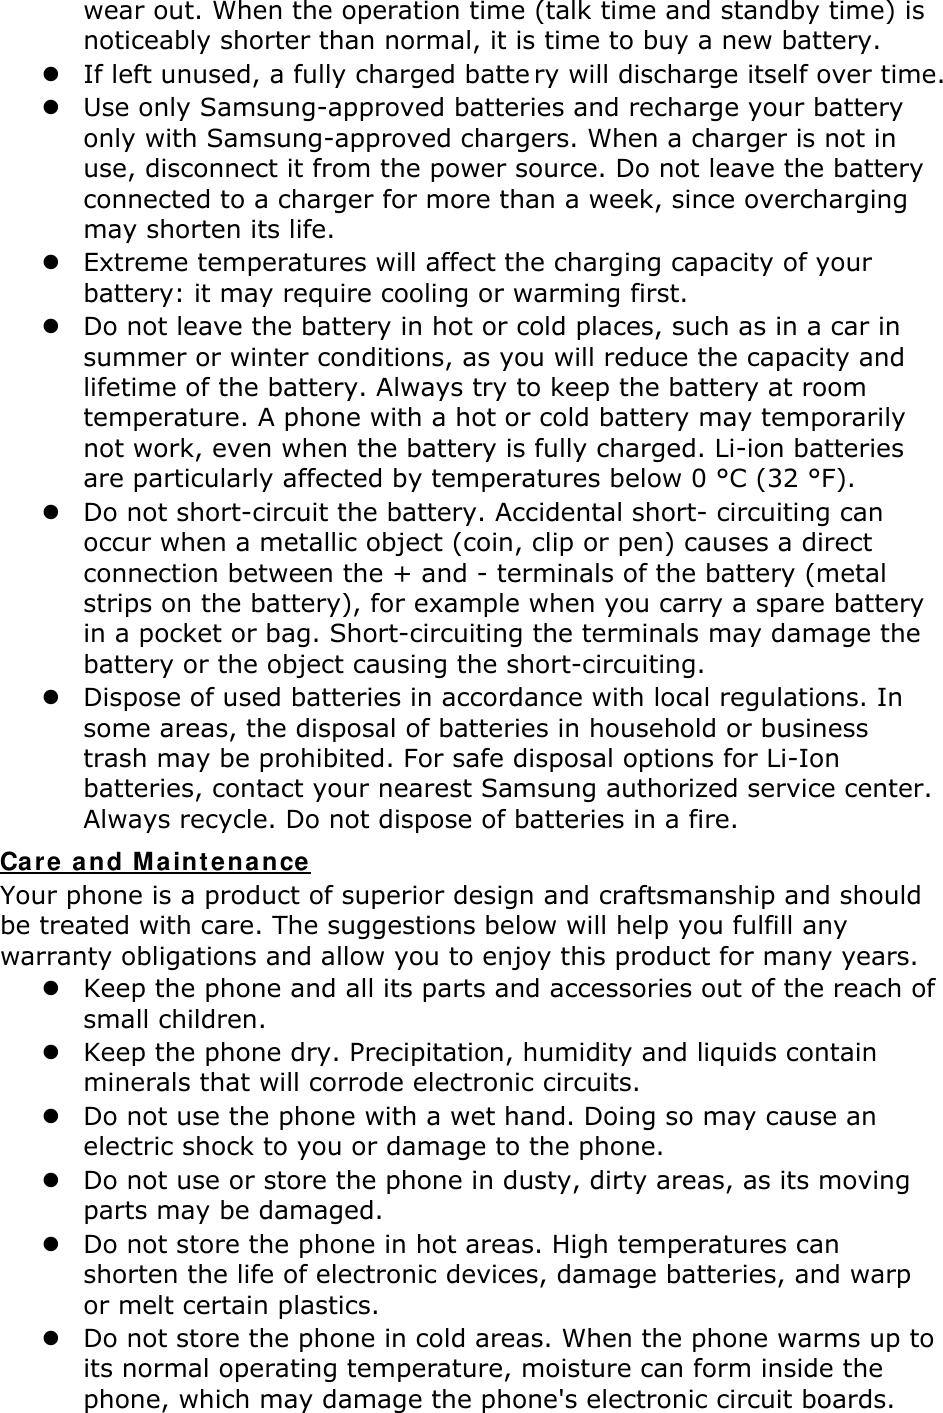 wear out. When the operation time (talk time and standby time) is noticeably shorter than normal, it is time to buy a new battery.  If left unused, a fully charged batte ry will discharge itself over time.   Use only Samsung-approved batteries and recharge your battery only with Samsung-approved chargers. When a charger is not in use, disconnect it from the power source. Do not leave the battery connected to a charger for more than a week, since overcharging may shorten its life.  Extreme temperatures will affect the charging capacity of your battery: it may require cooling or warming first.  Do not leave the battery in hot or cold places, such as in a car in summer or winter conditions, as you will reduce the capacity and lifetime of the battery. Always try to keep the battery at room temperature. A phone with a hot or cold battery may temporarily not work, even when the battery is fully charged. Li-ion batteries are particularly affected by temperatures below 0 °C (32 °F).  Do not short-circuit the battery. Accidental short- circuiting can occur when a metallic object (coin, clip or pen) causes a direct connection between the + and - terminals of the battery (metal strips on the battery), for example when you carry a spare battery in a pocket or bag. Short-circuiting the terminals may damage the battery or the object causing the short-circuiting.  Dispose of used batteries in accordance with local regulations. In some areas, the disposal of batteries in household or business trash may be prohibited. For safe disposal options for Li-Ion batteries, contact your nearest Samsung authorized service center. Always recycle. Do not dispose of batteries in a fire. Car e and M aint enance Your phone is a product of superior design and craftsmanship and should be treated with care. The suggestions below will help you fulfill any warranty obligations and allow you to enjoy this product for many years.  Keep the phone and all its parts and accessories out of the reach of small children.  Keep the phone dry. Precipitation, humidity and liquids contain minerals that will corrode electronic circuits.  Do not use the phone with a wet hand. Doing so may cause an electric shock to you or damage to the phone.  Do not use or store the phone in dusty, dirty areas, as its moving parts may be damaged.  Do not store the phone in hot areas. High temperatures can shorten the life of electronic devices, damage batteries, and warp or melt certain plastics.  Do not store the phone in cold areas. When the phone warms up to its normal operating temperature, moisture can form inside the phone, which may damage the phone&apos;s electronic circuit boards. 